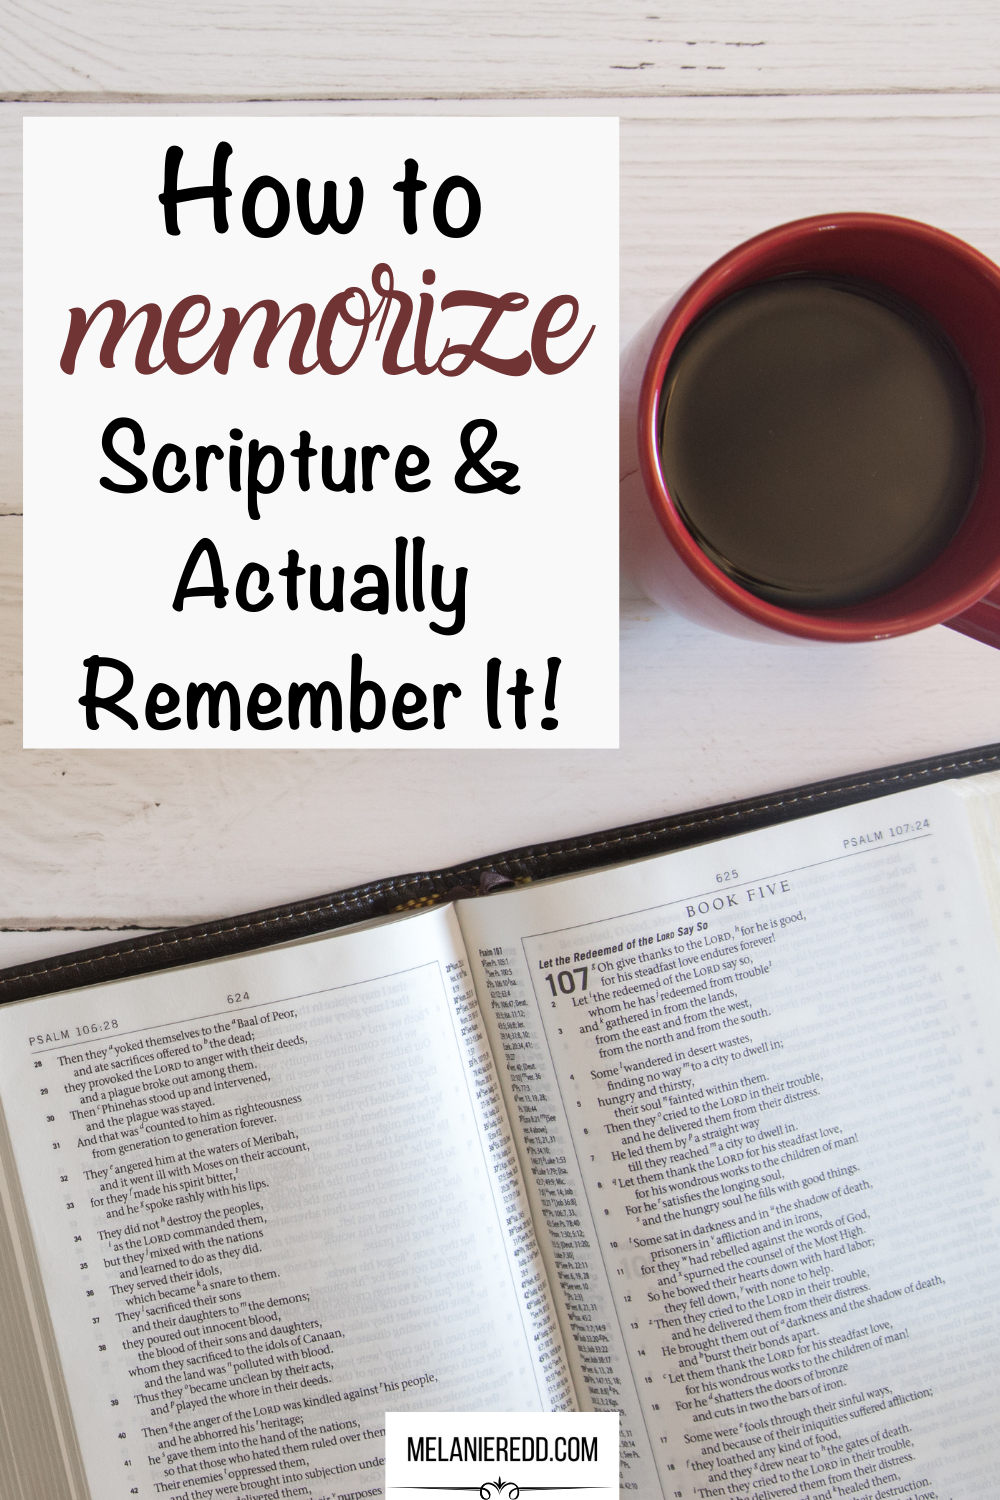 How can we commit more Bible verses to memory? Here are some practical suggestions to how to memorize scripture & actually remember it!